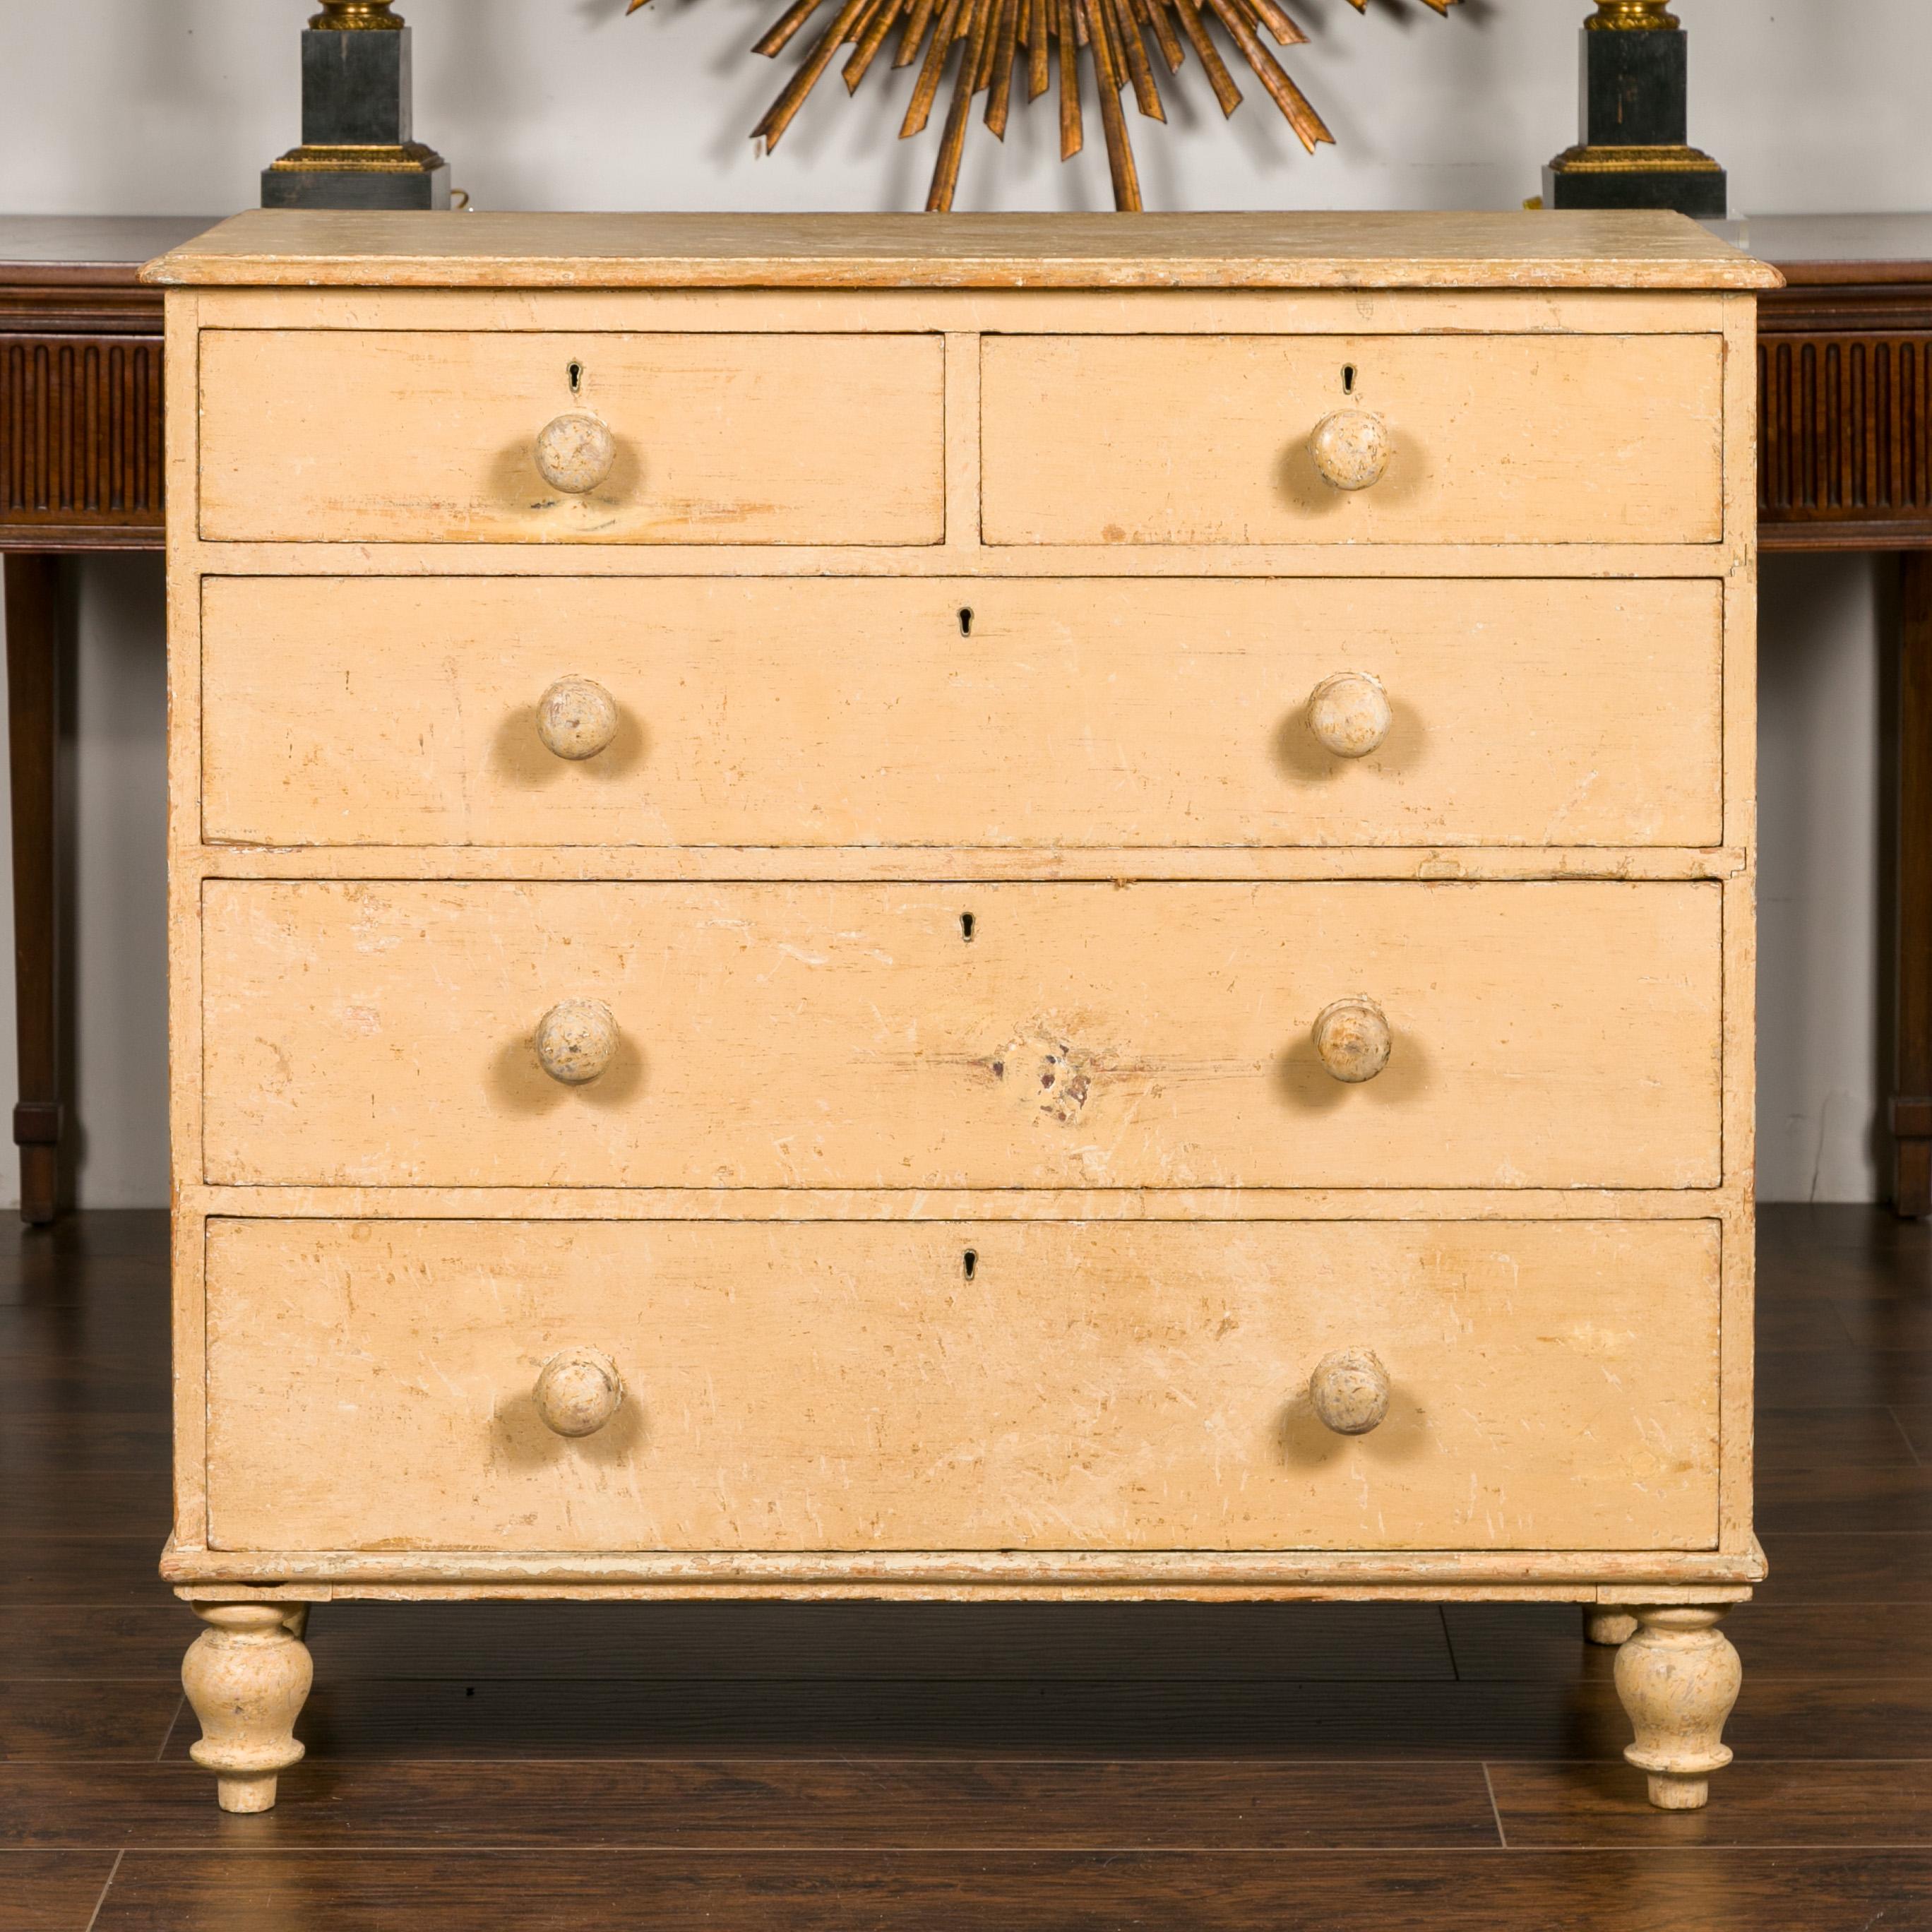 An English painted wood chest from the mid-19th century, with five graduating drawers, turnip feet and distressed finish. Born in England during the third quarter of the 19th century, this painted chest features a rectangular top sitting above five